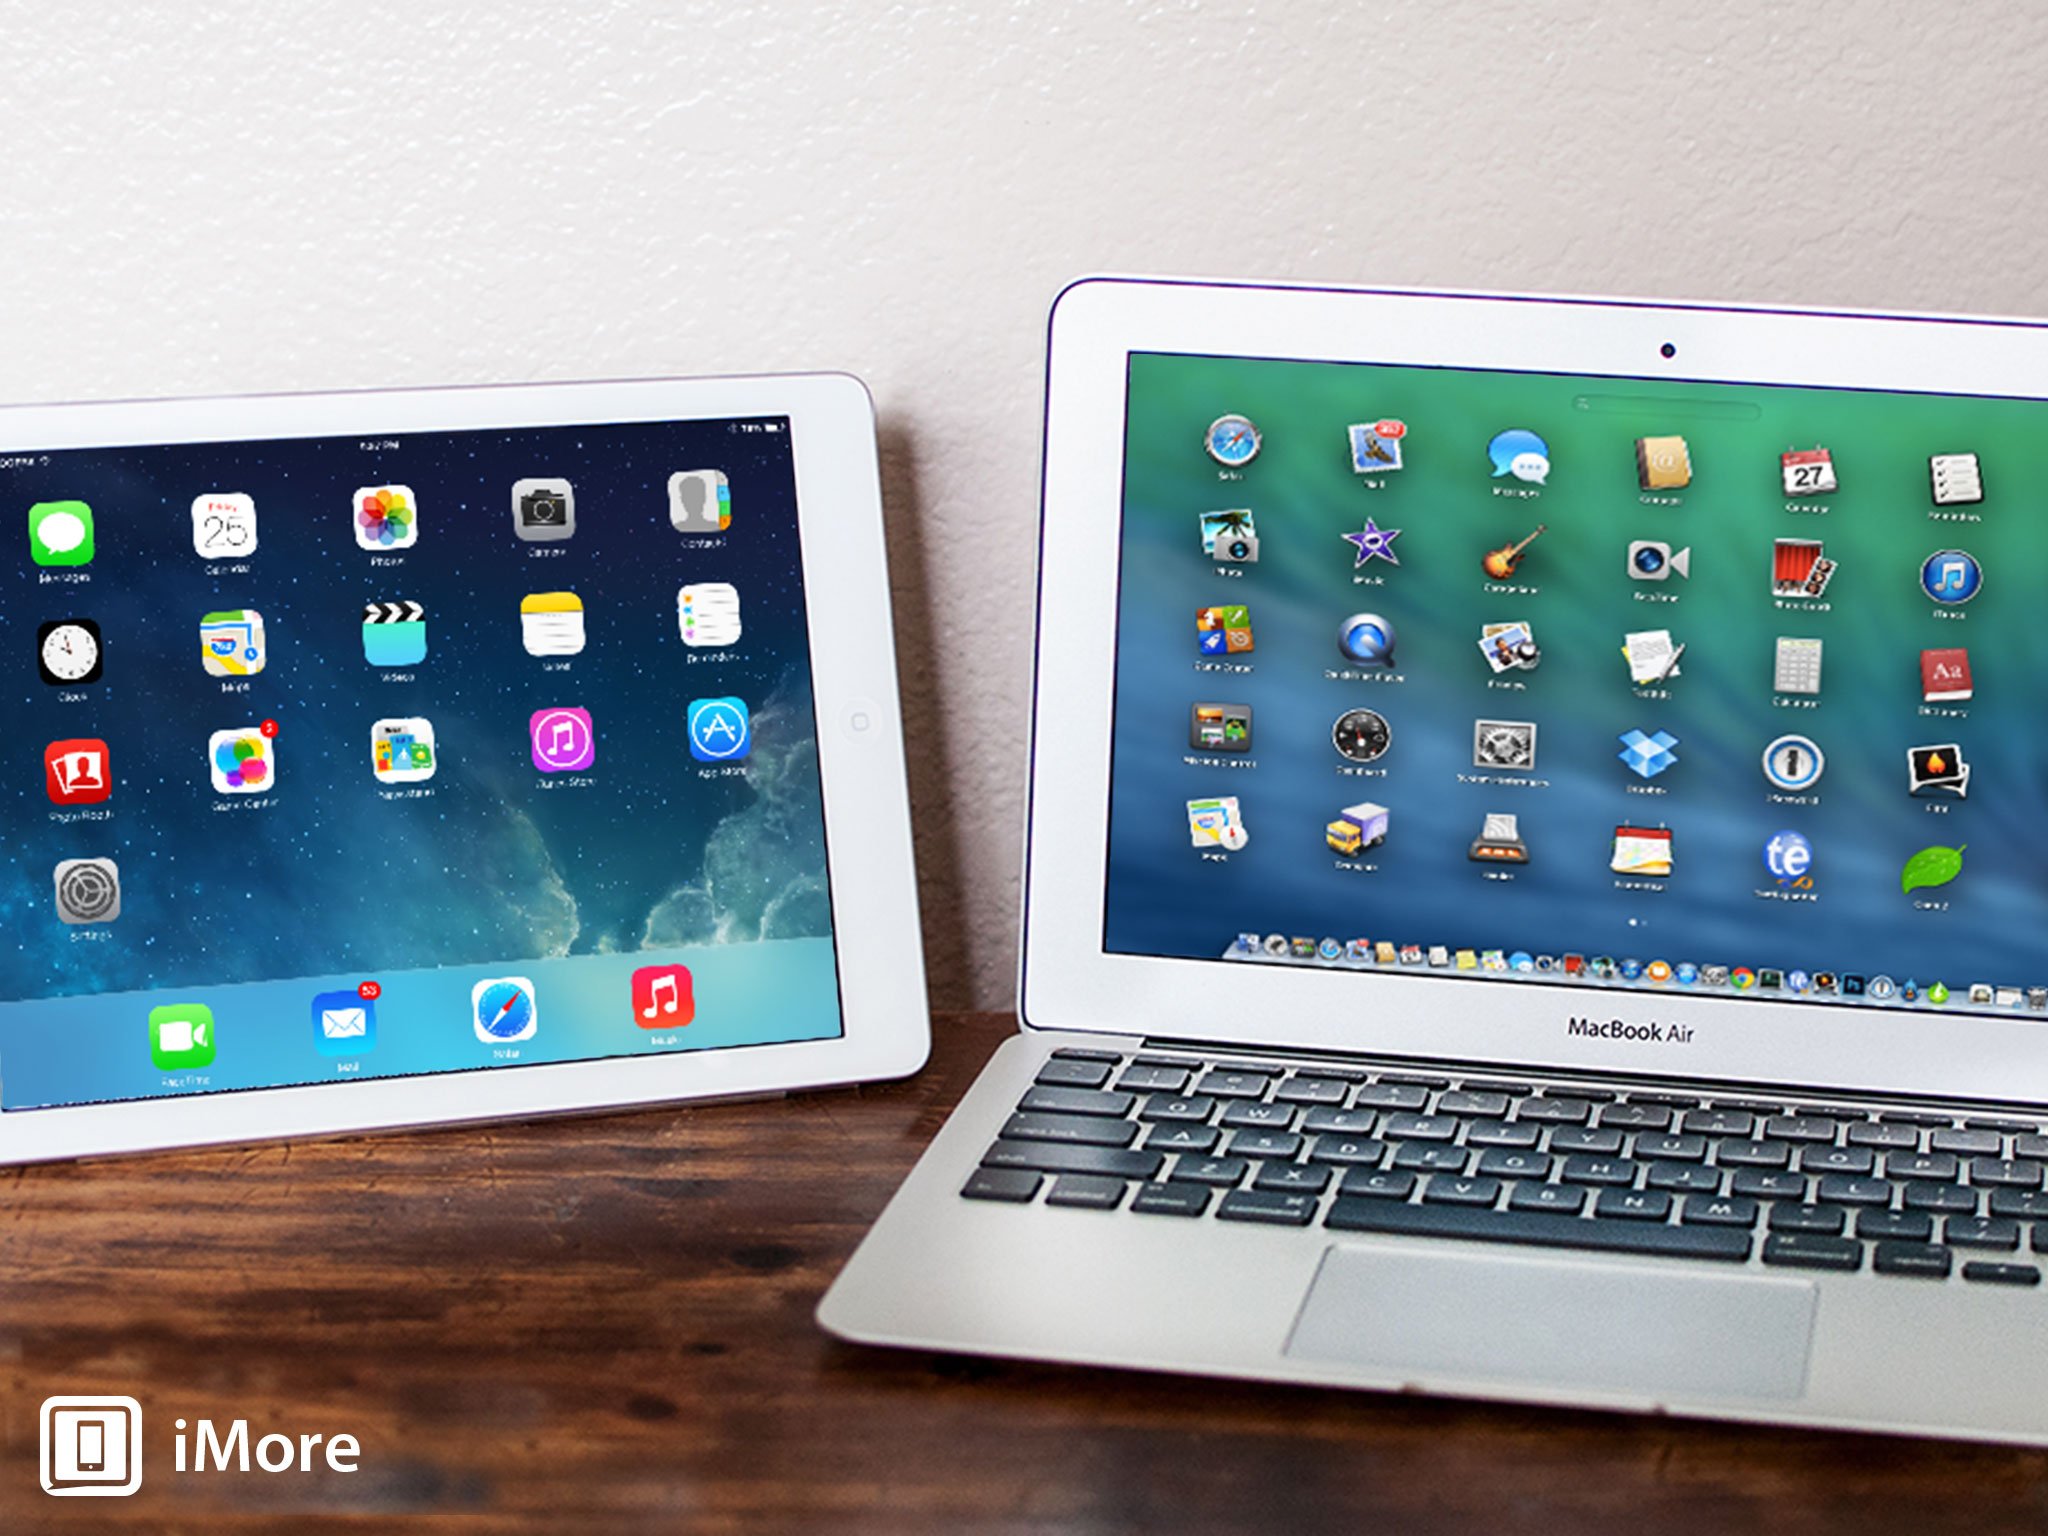 OS Mavericks features that'd be great to see in iOS 8